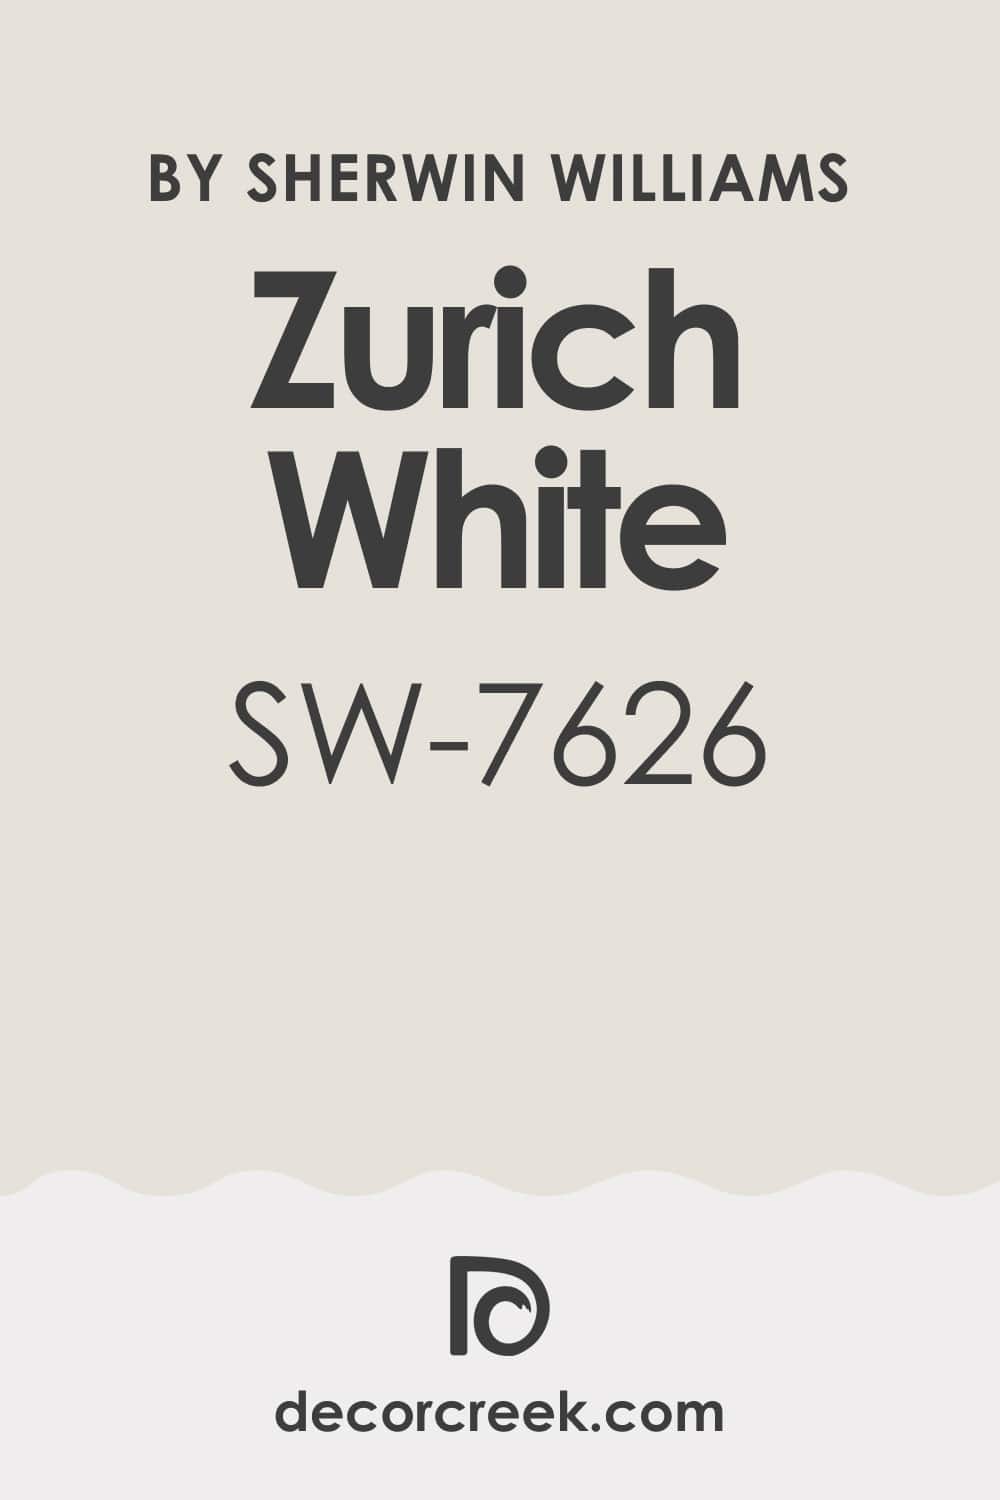 Zurich White SW-7626 By Sherwin-Williams. What Kind Of Color Is It?